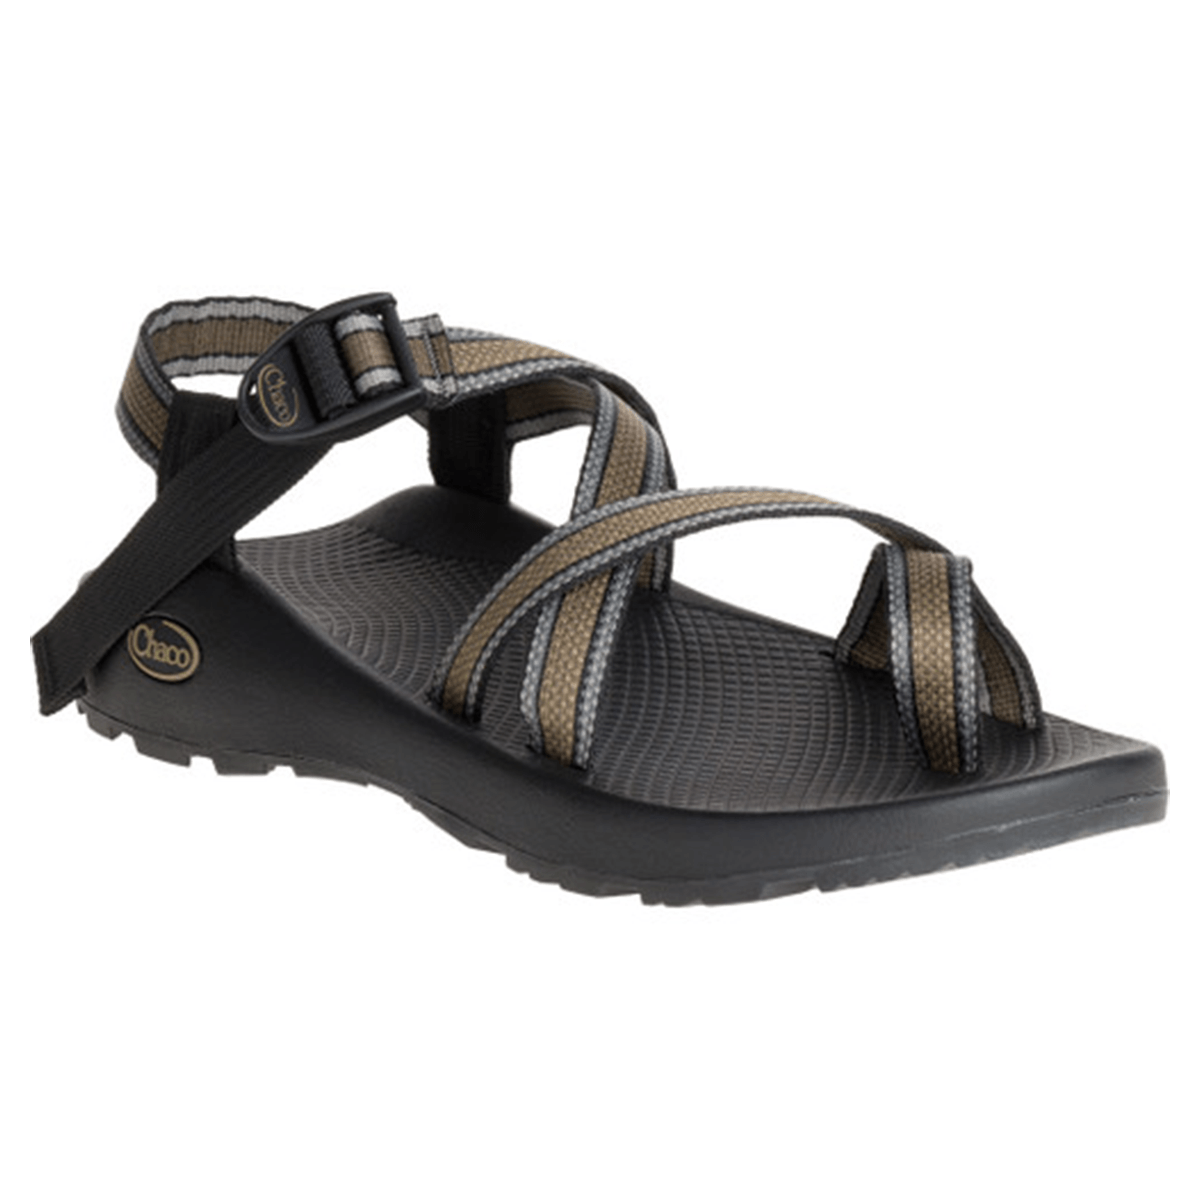 Rationalisering Auto Monarch Chaco Men's Z2 Classic Metal